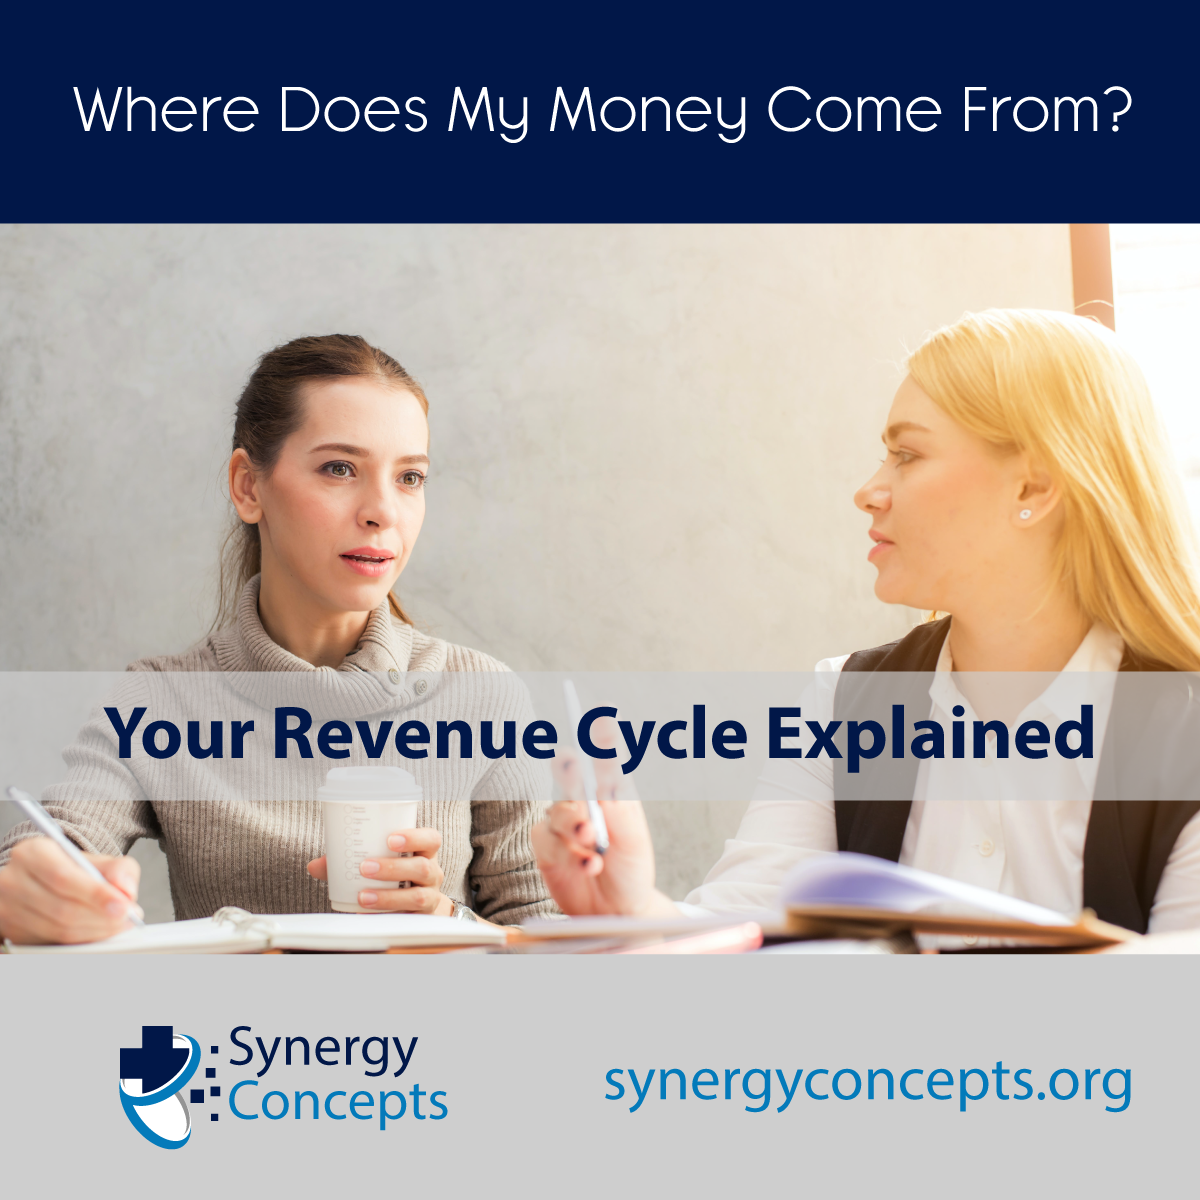 Where Does My Money Come From? Your Revenue Cycle Explained